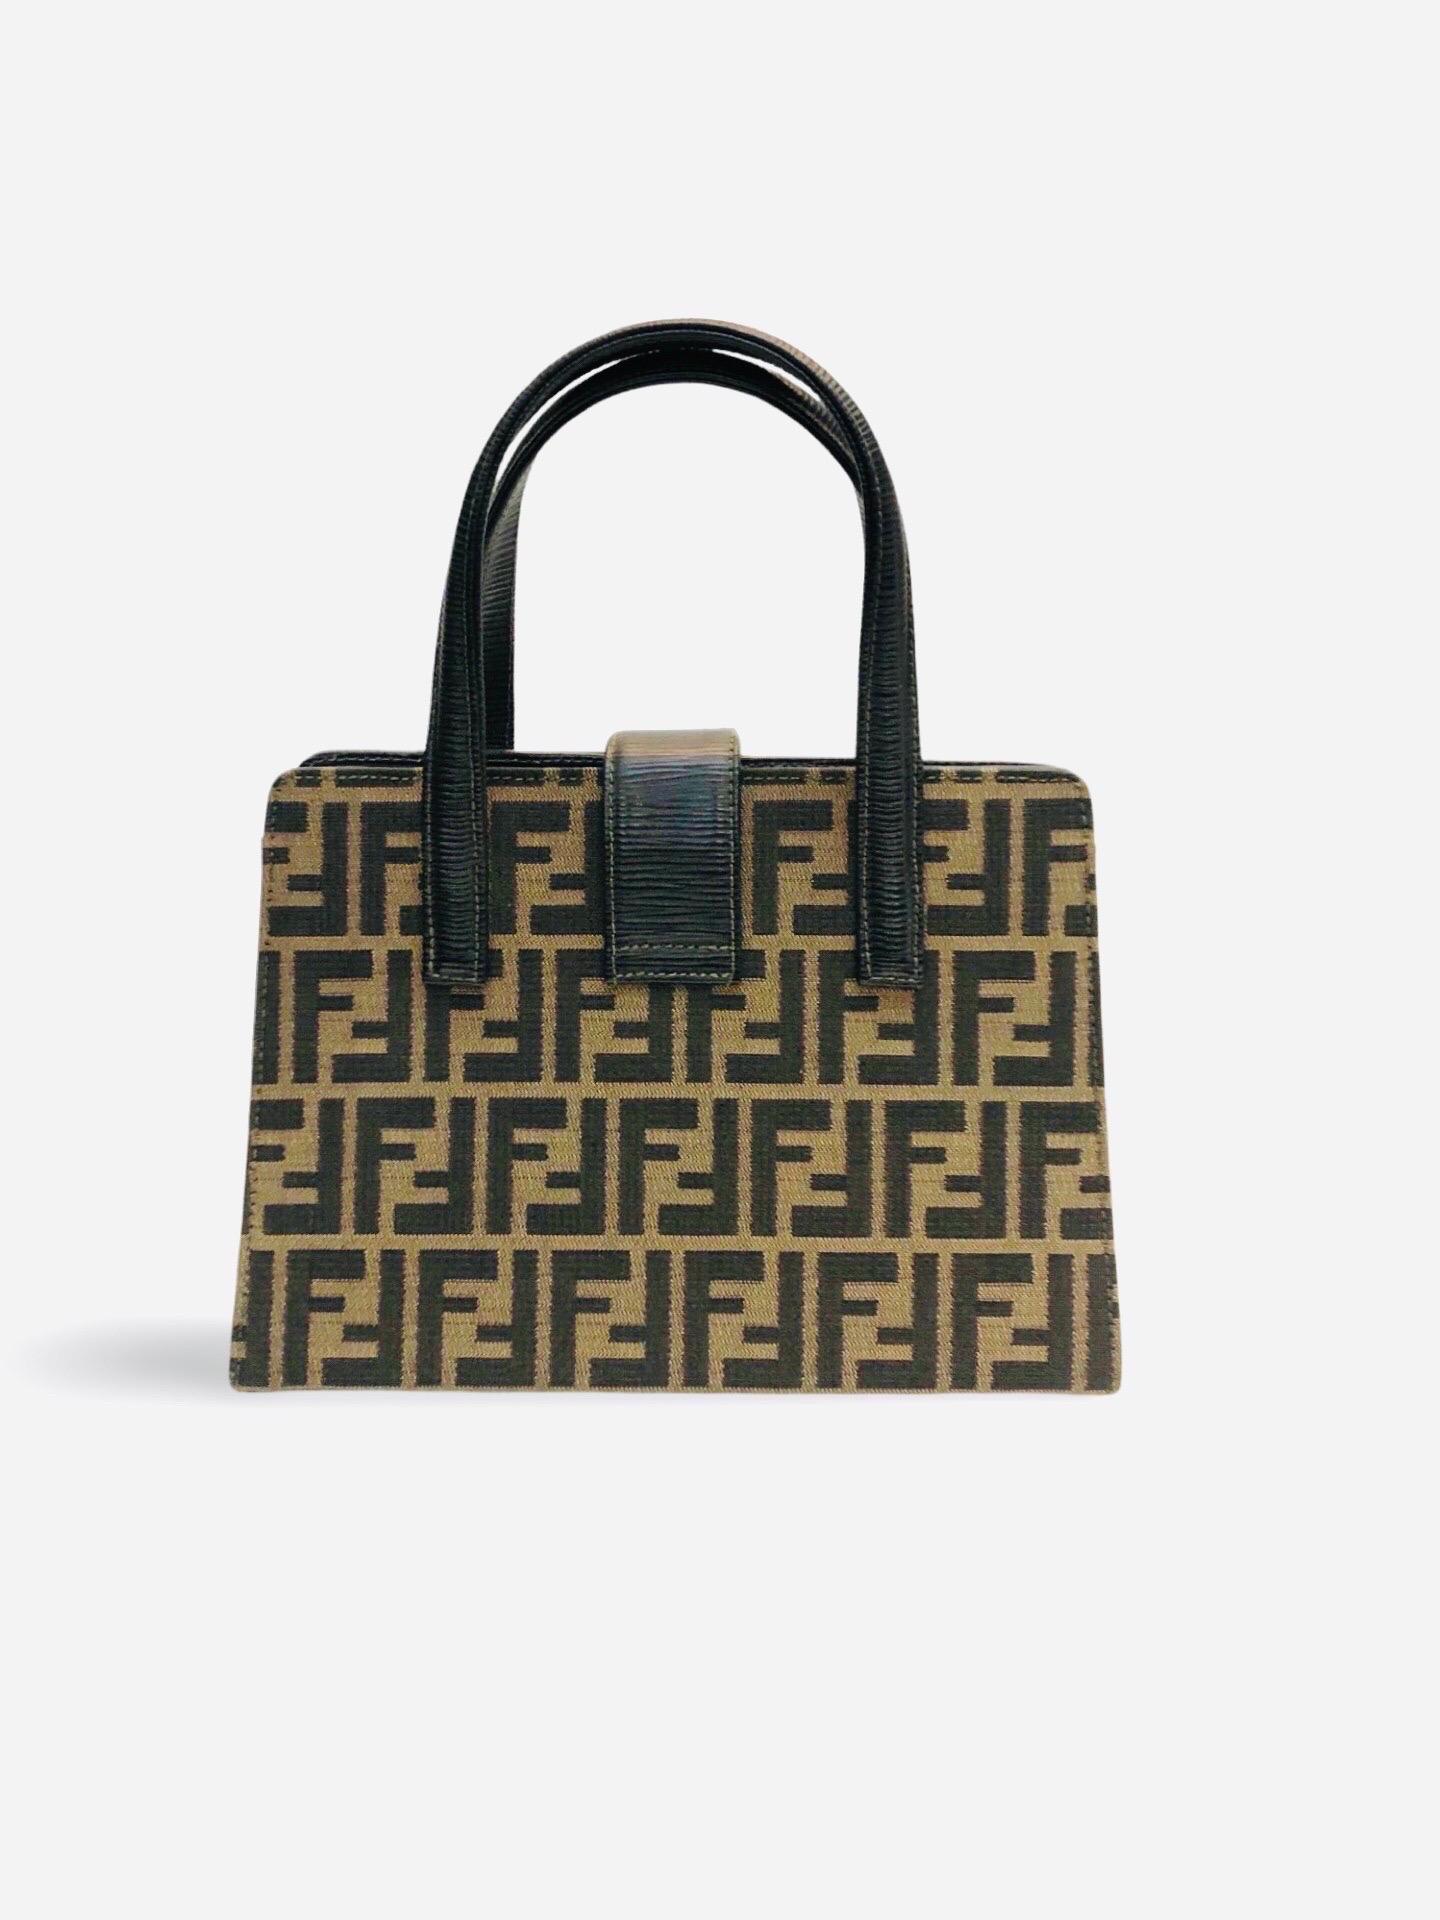 - Fendi zucca print canvas handbag. It is a very structured bag. This style is super rare! 

- Featuring a leather handle, gold toned hardware 